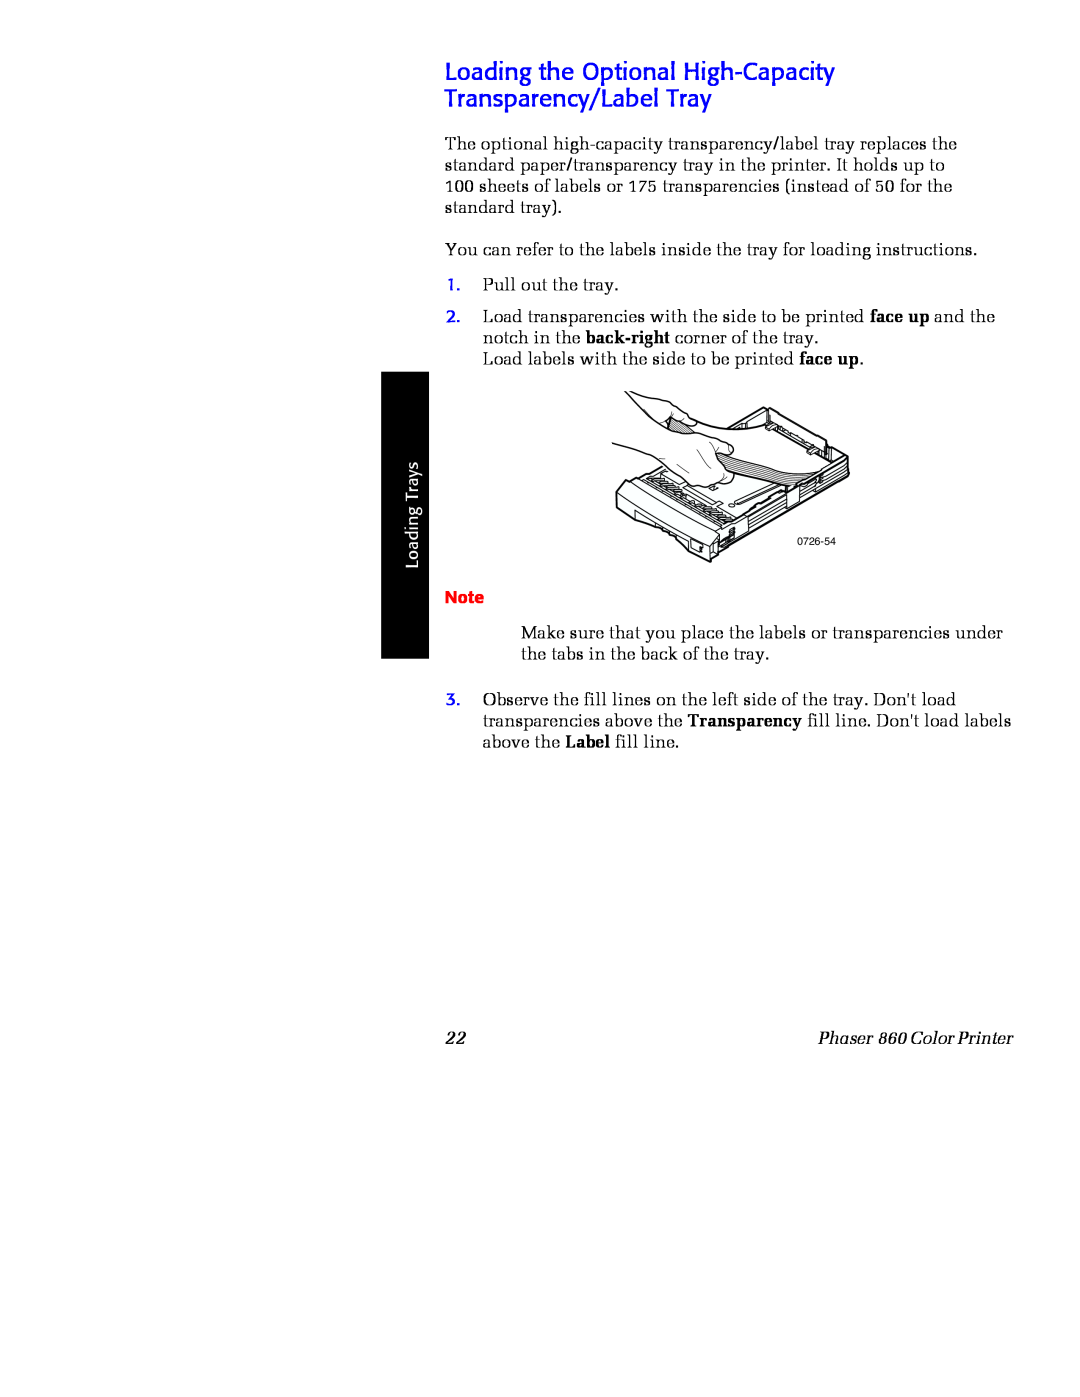 Xerox manual Loading the Optional High-Capacity Transparency/Label Tray, Loading Trays, Phaser 860 Color Printer 